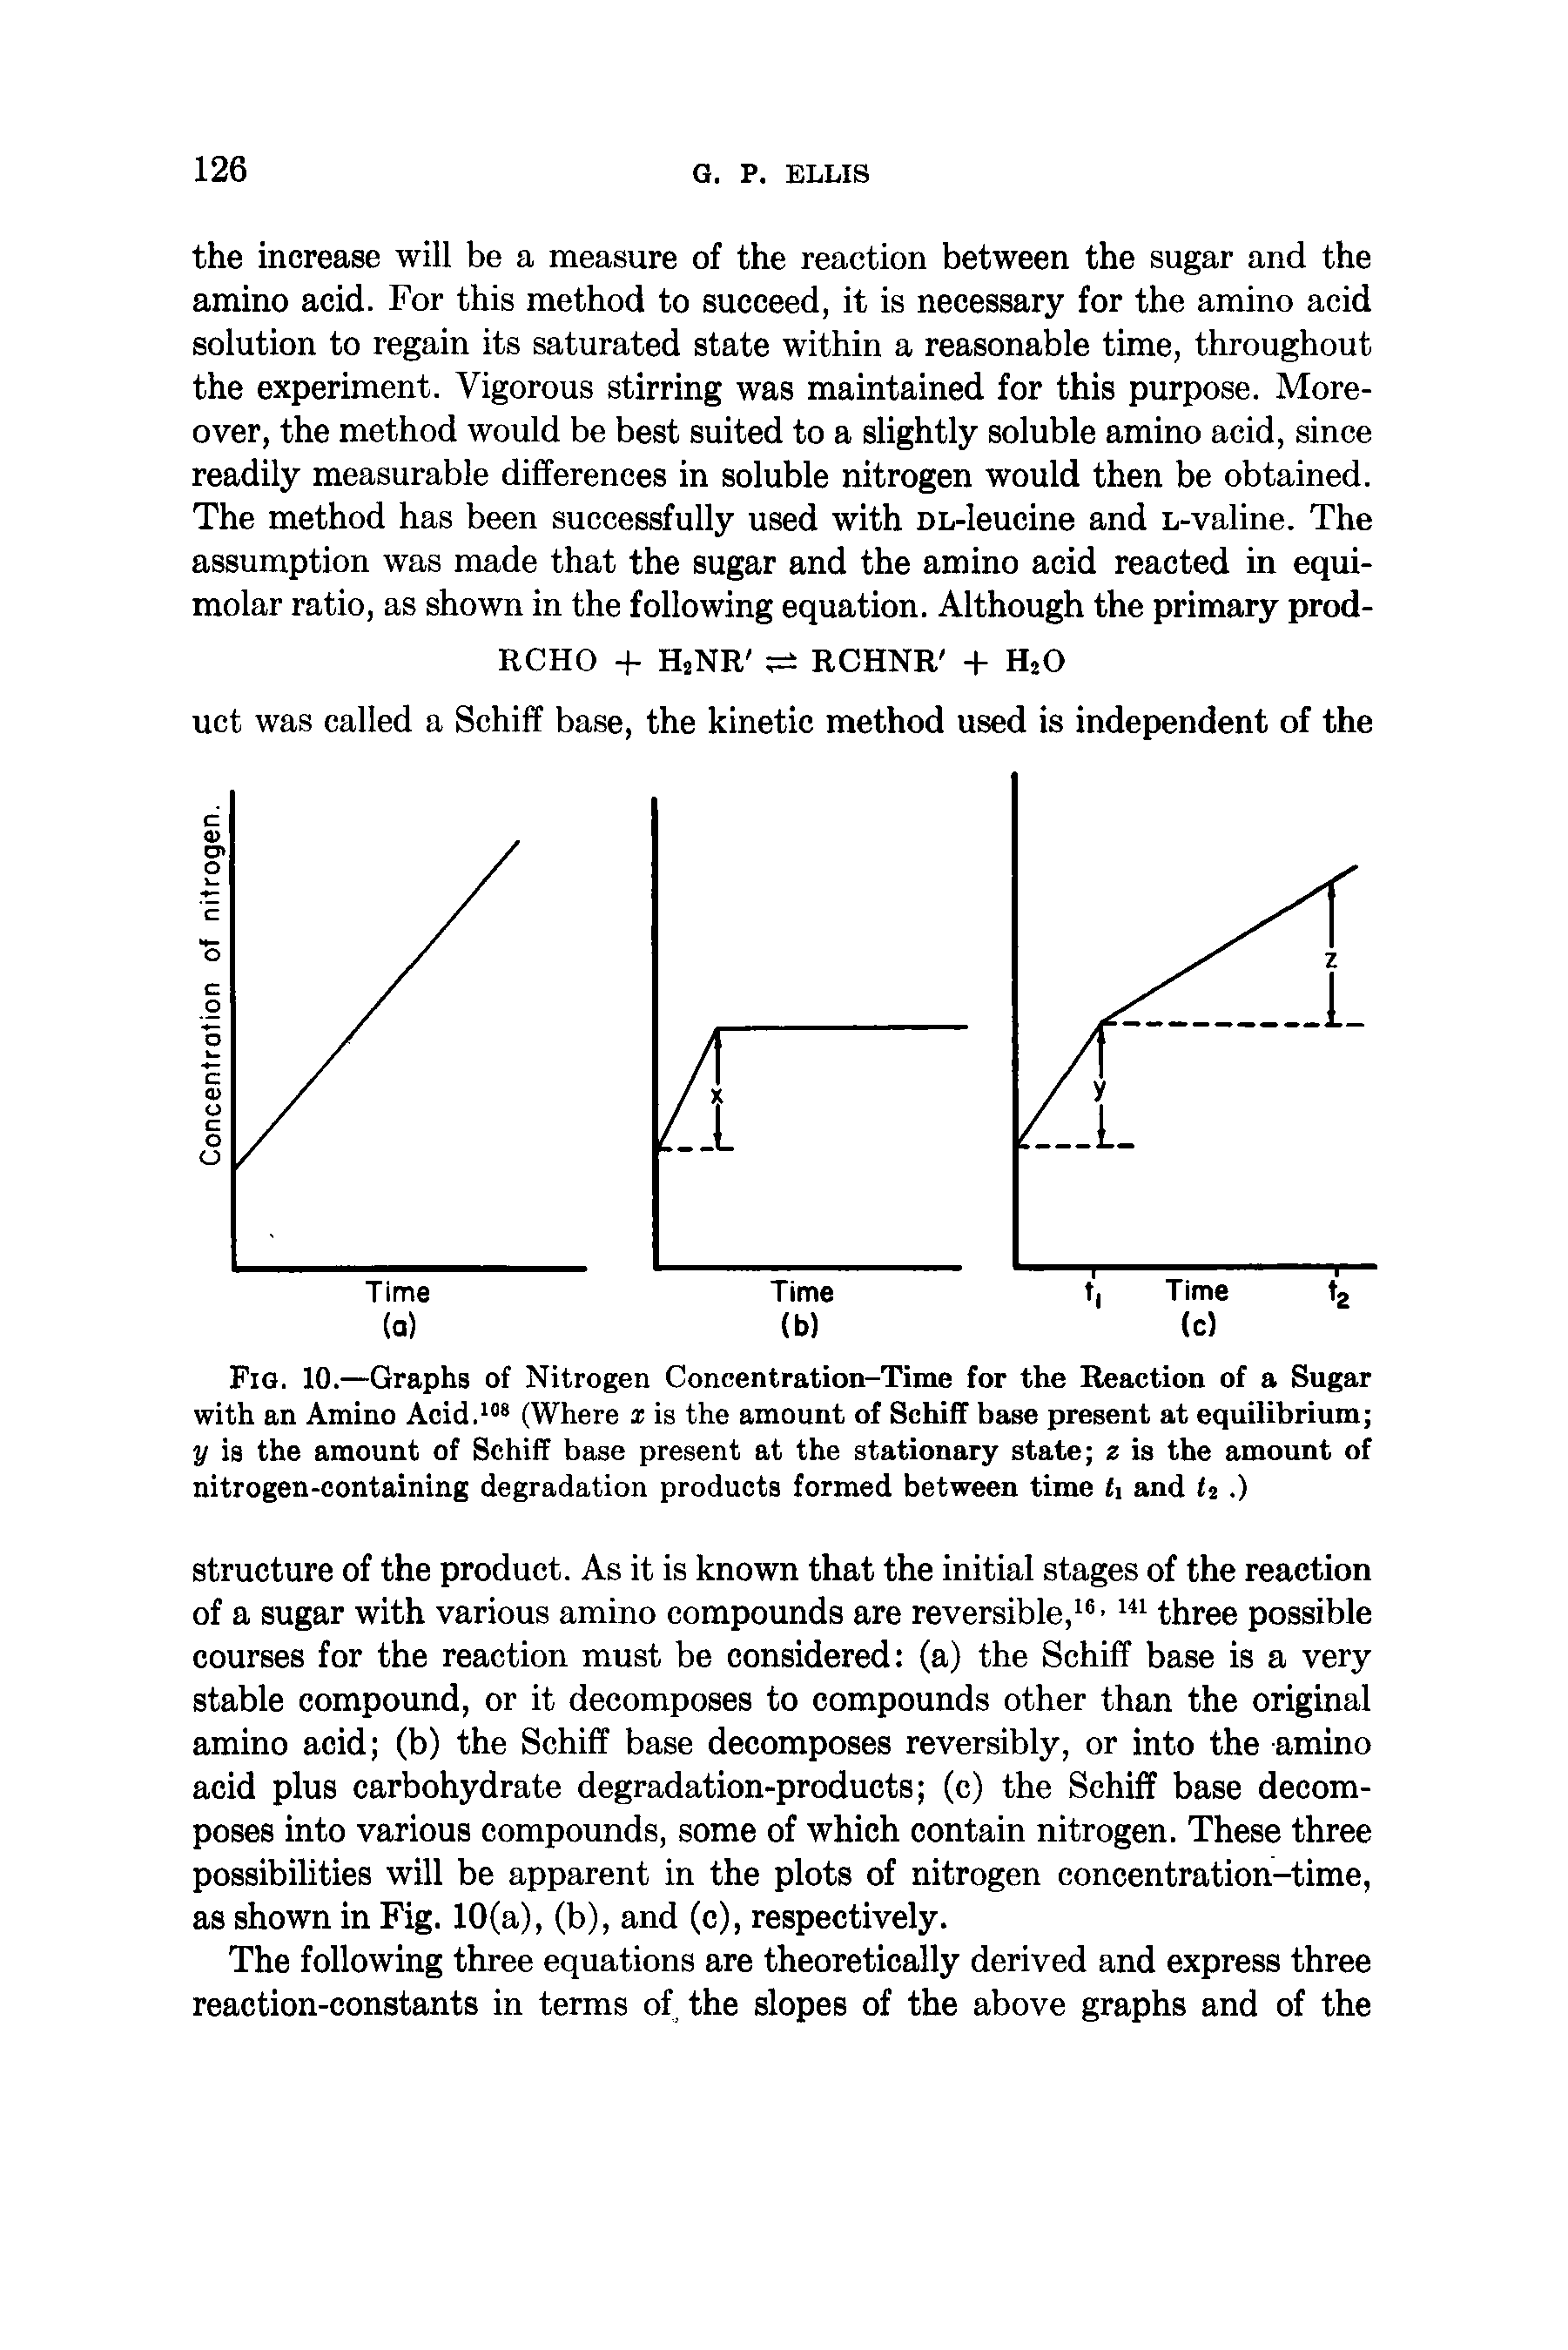 Fig. 10.—Graphs of Nitrogen Concentration-Time for the Reaction of a Sugar with an Amino Acid.108 (Where x is the amount of Schiff base present at equilibrium y is the amount of Schiff base present at the stationary state z is the amount of nitrogen-containing degradation products formed between time <1 and <2. )...